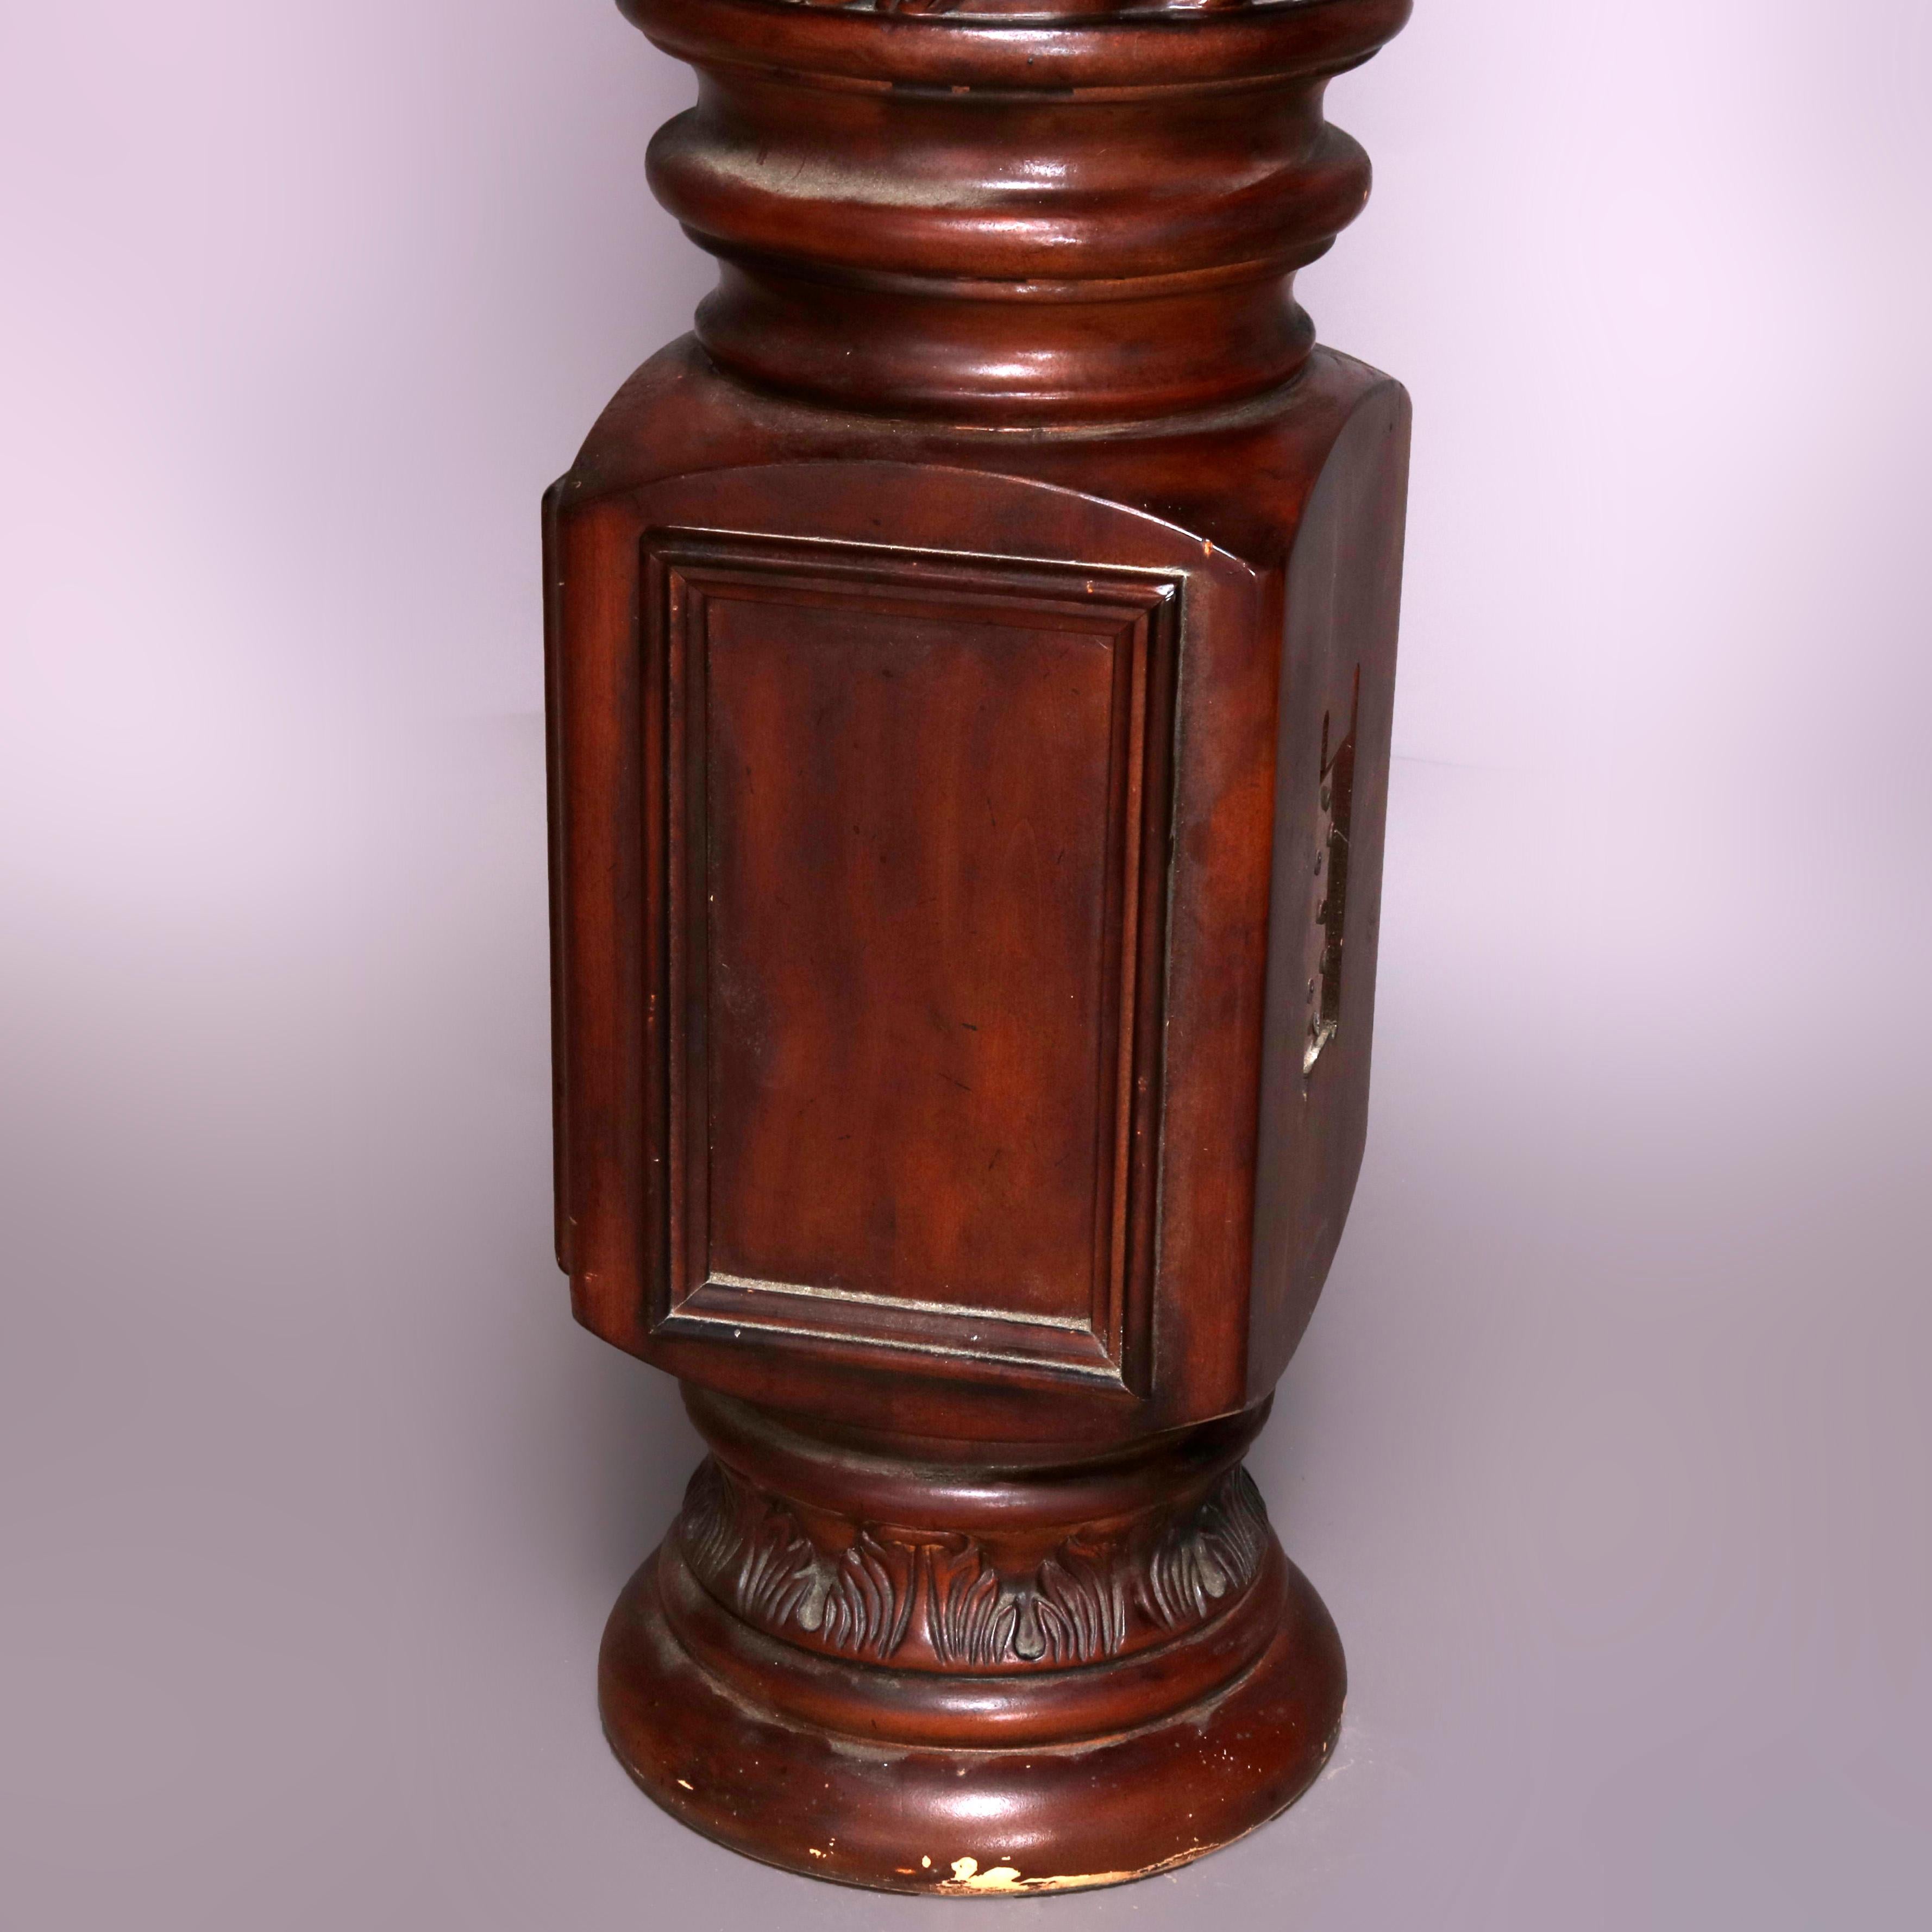 American Pair of Oversized Mahogany and Composite Architectural Columns, 20th Century